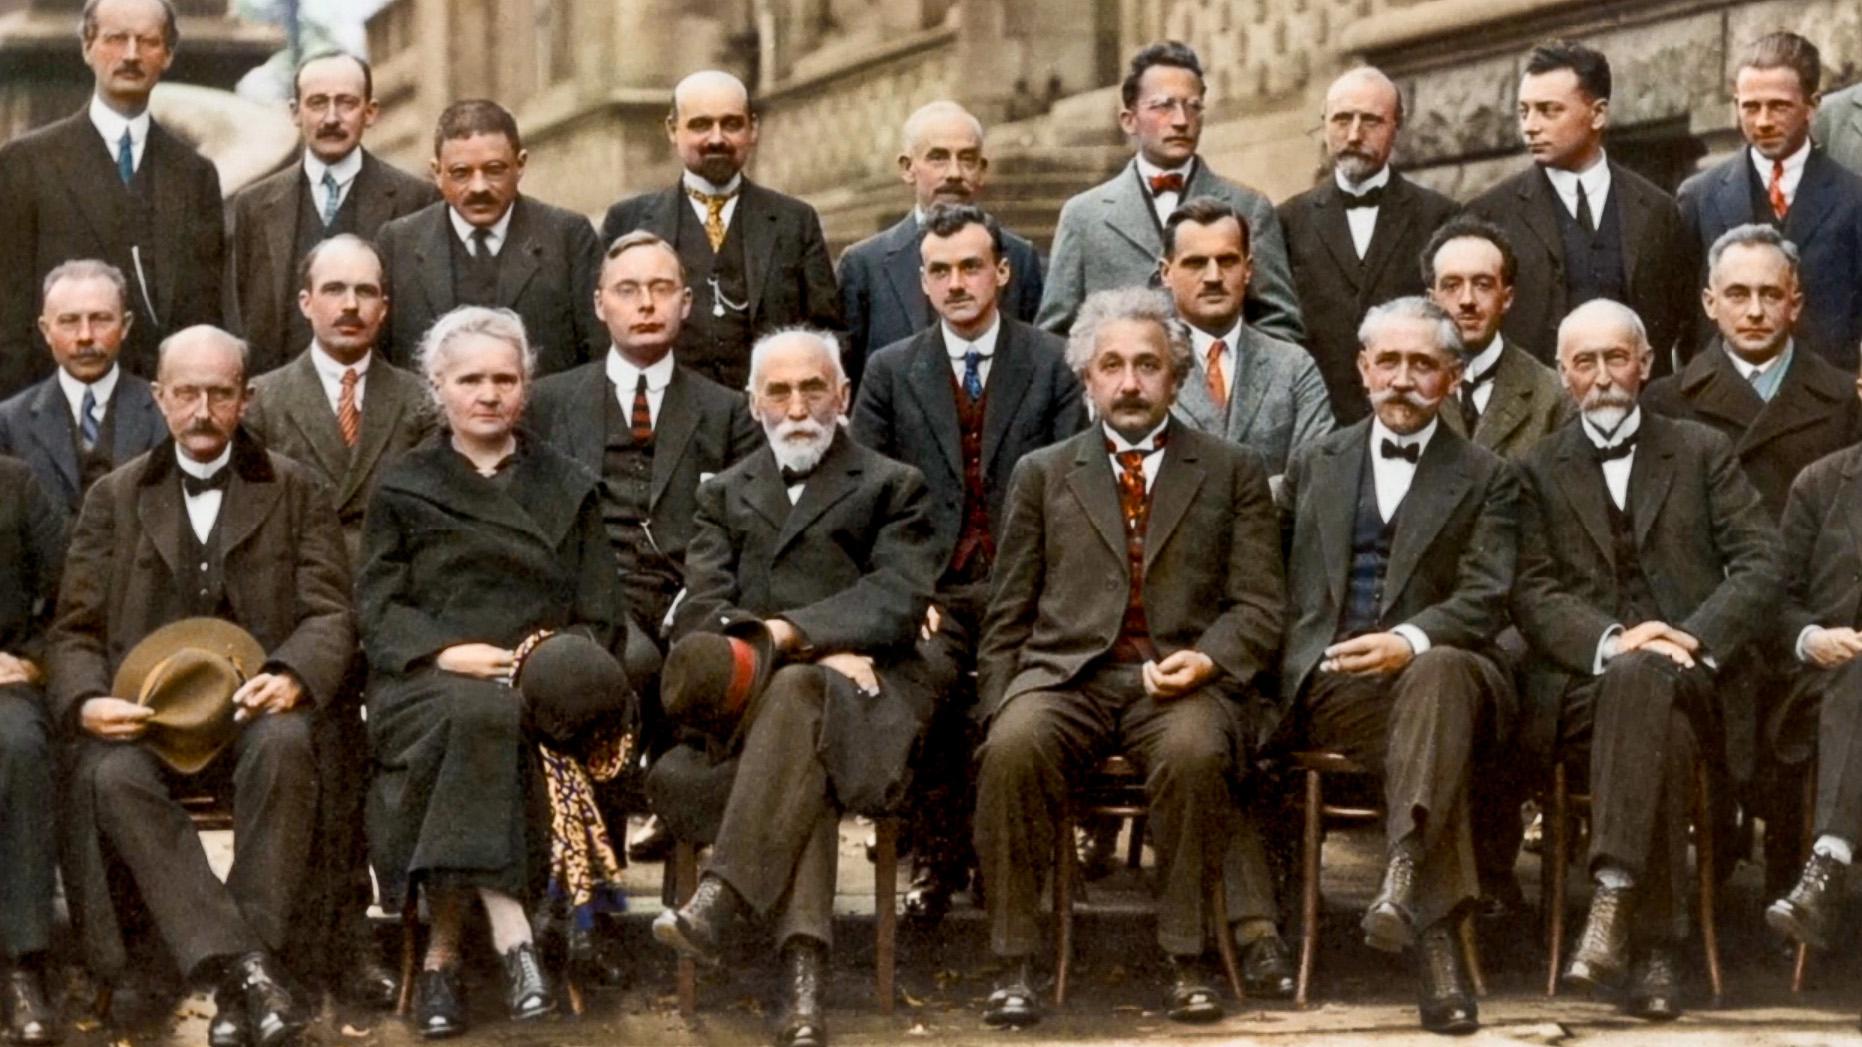 From the October 1927 Fifth Solvay International Conference on Electrons and Photons. Hendrik Lorentz, Leiden University, seated between Madame Curie and Einstein, chaired the conference.